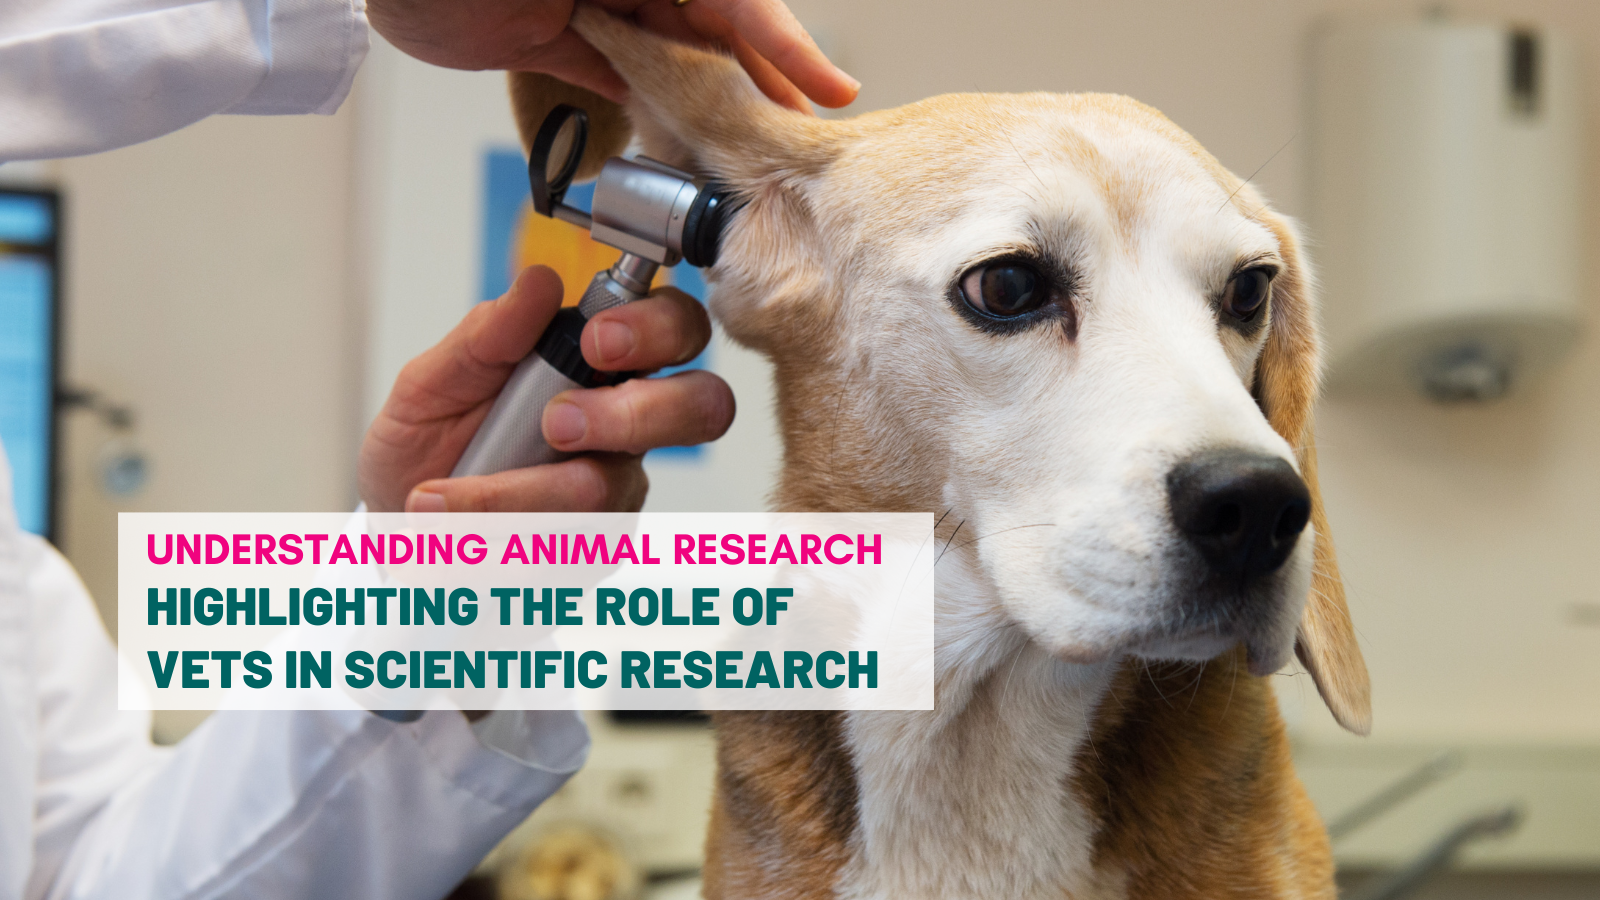 Highlighting the role of vets in research